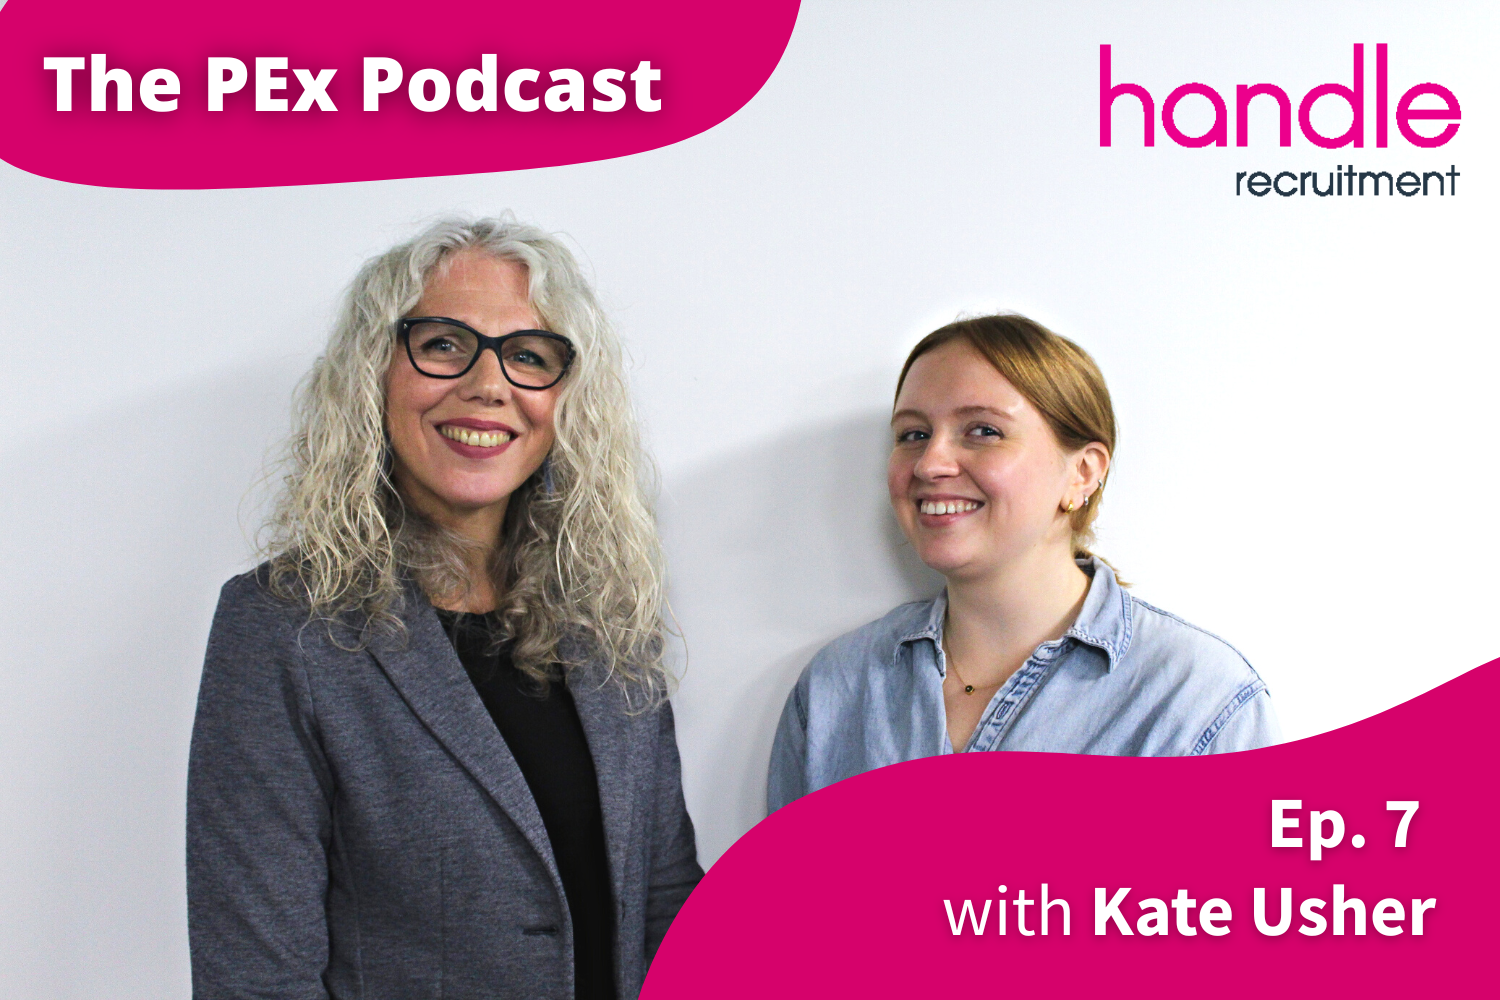 PEx Podcast - Why we’re scared to talk about menopause, with Kate Usher